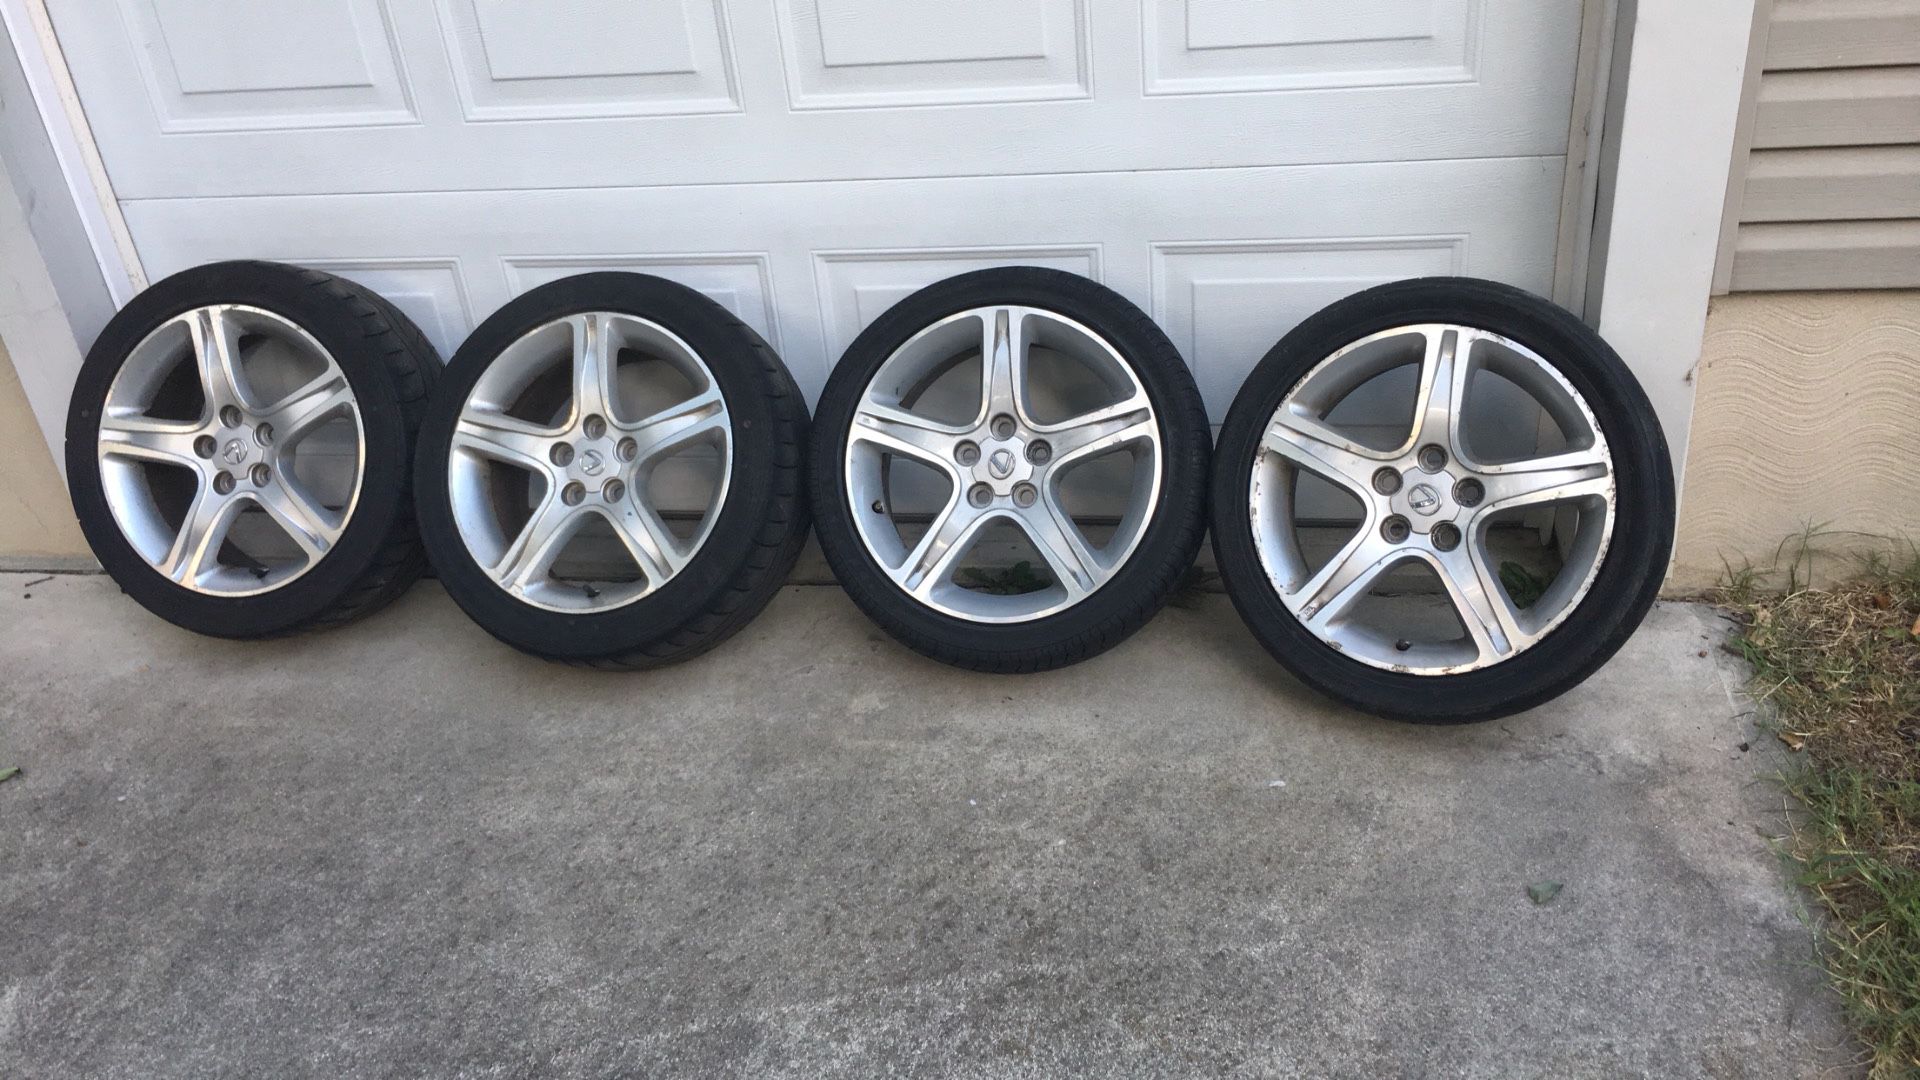 Is300 sportcross staggered wheels rare